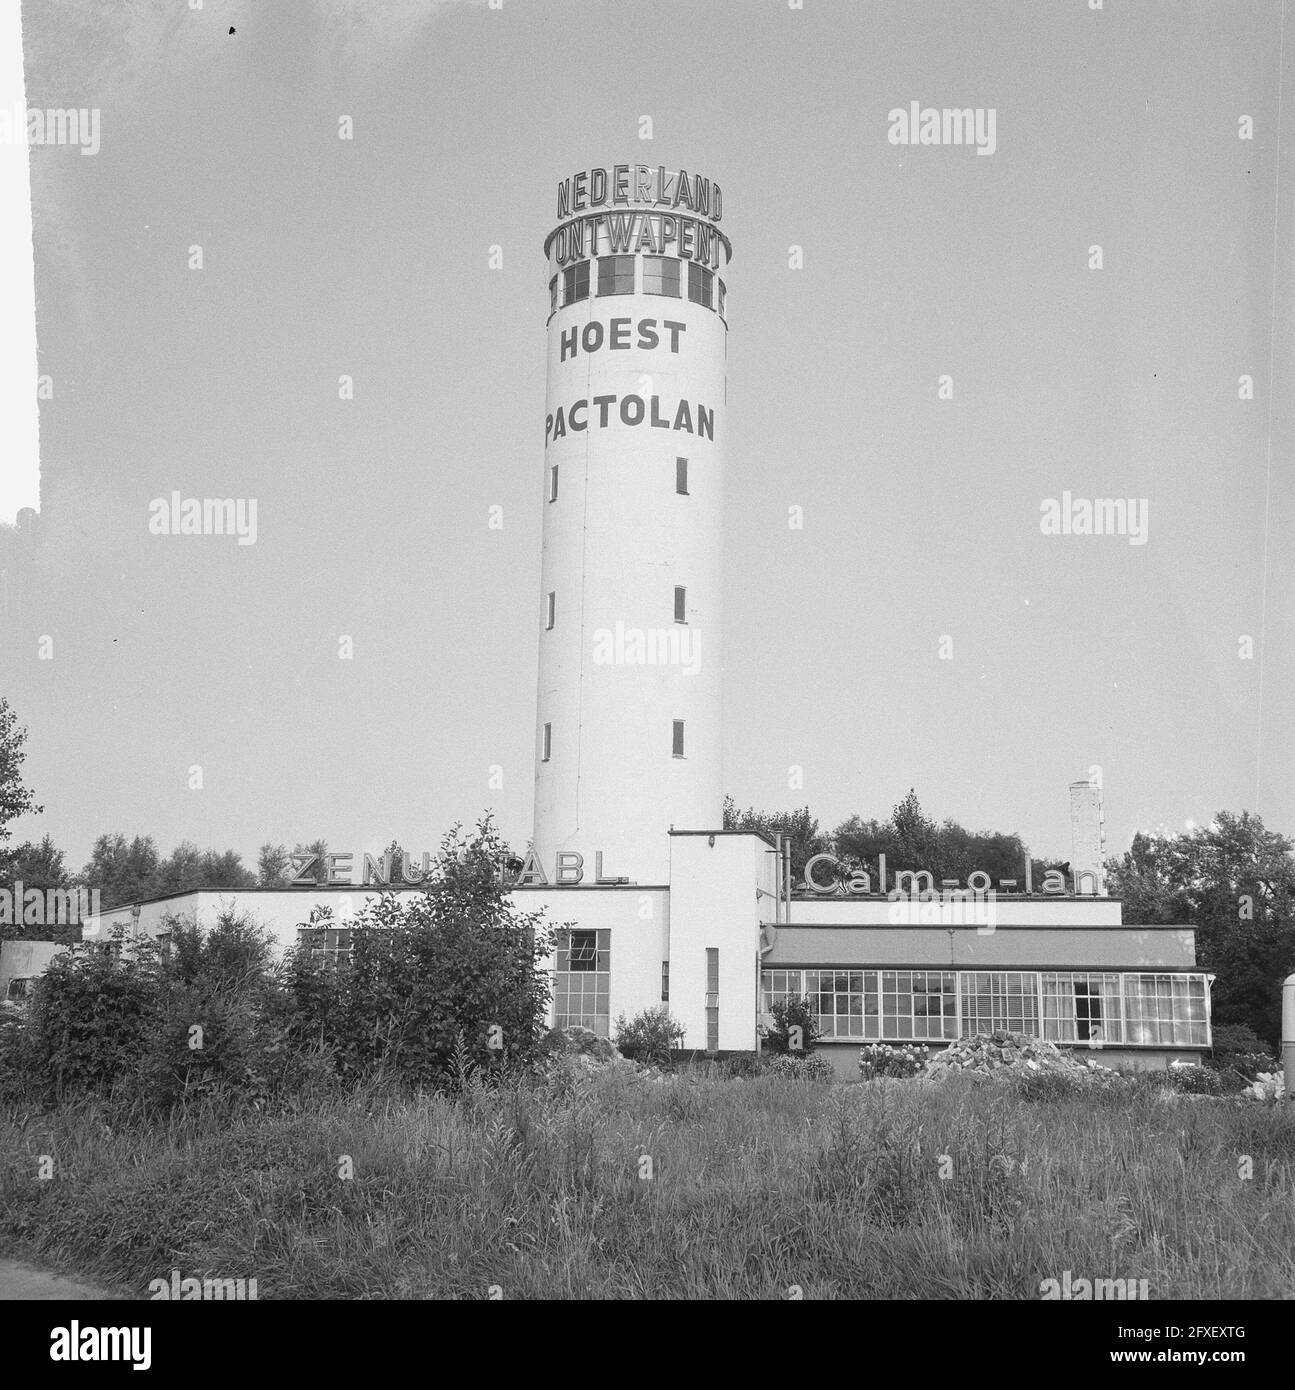 Tower with text Nederland Ontwapent (Netherlands Disarmed) near Naarden, August 9, 1965, texts, towers, The Netherlands, 20th century press agency photo, news to remember, documentary, historic photography 1945-1990, visual stories, human history of the Twentieth Century, capturing moments in time Stock Photo